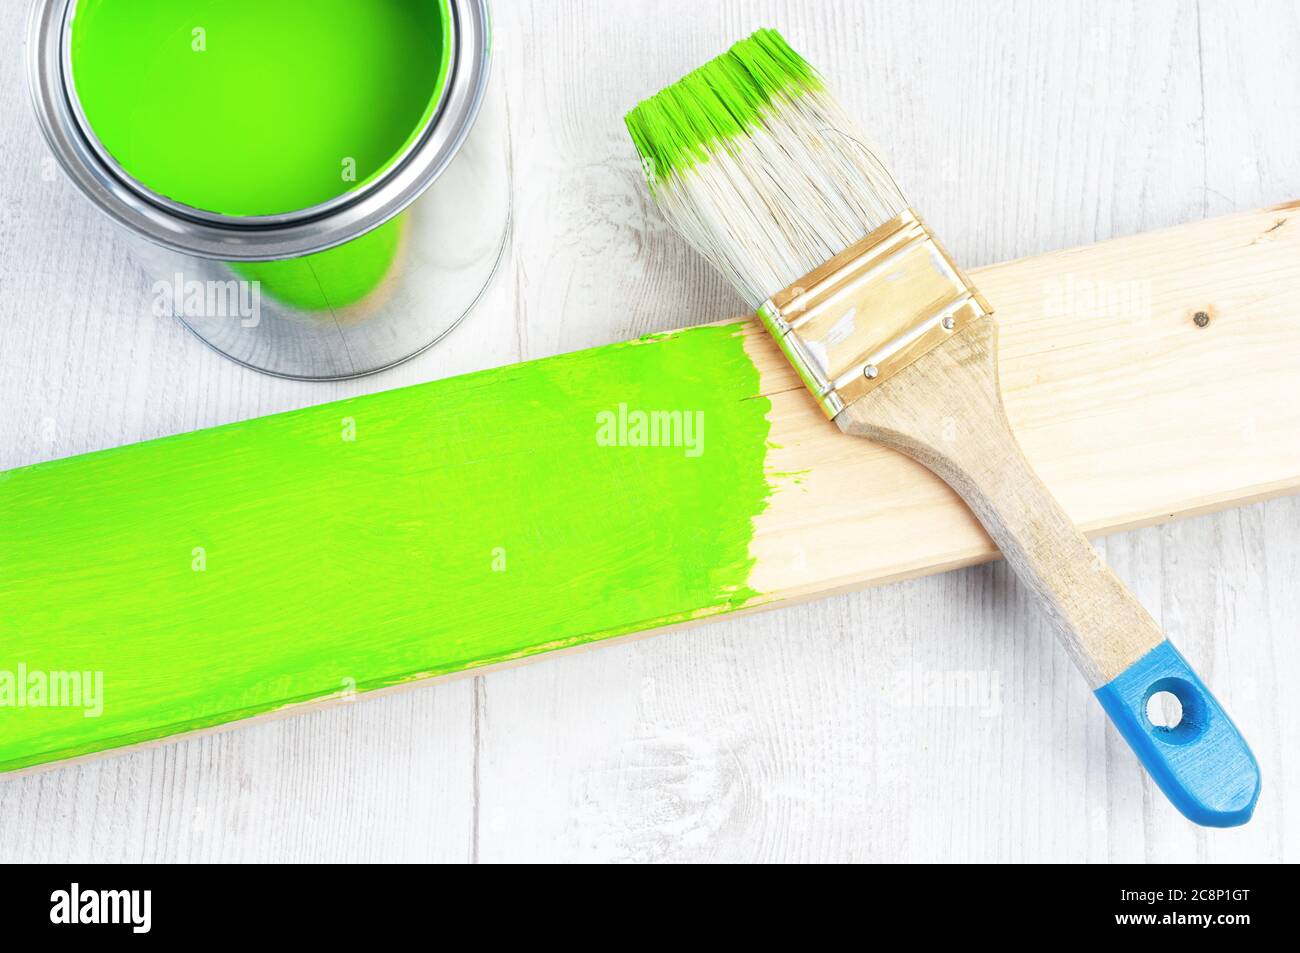 Paint brush and can on wooden surface Stock Photo